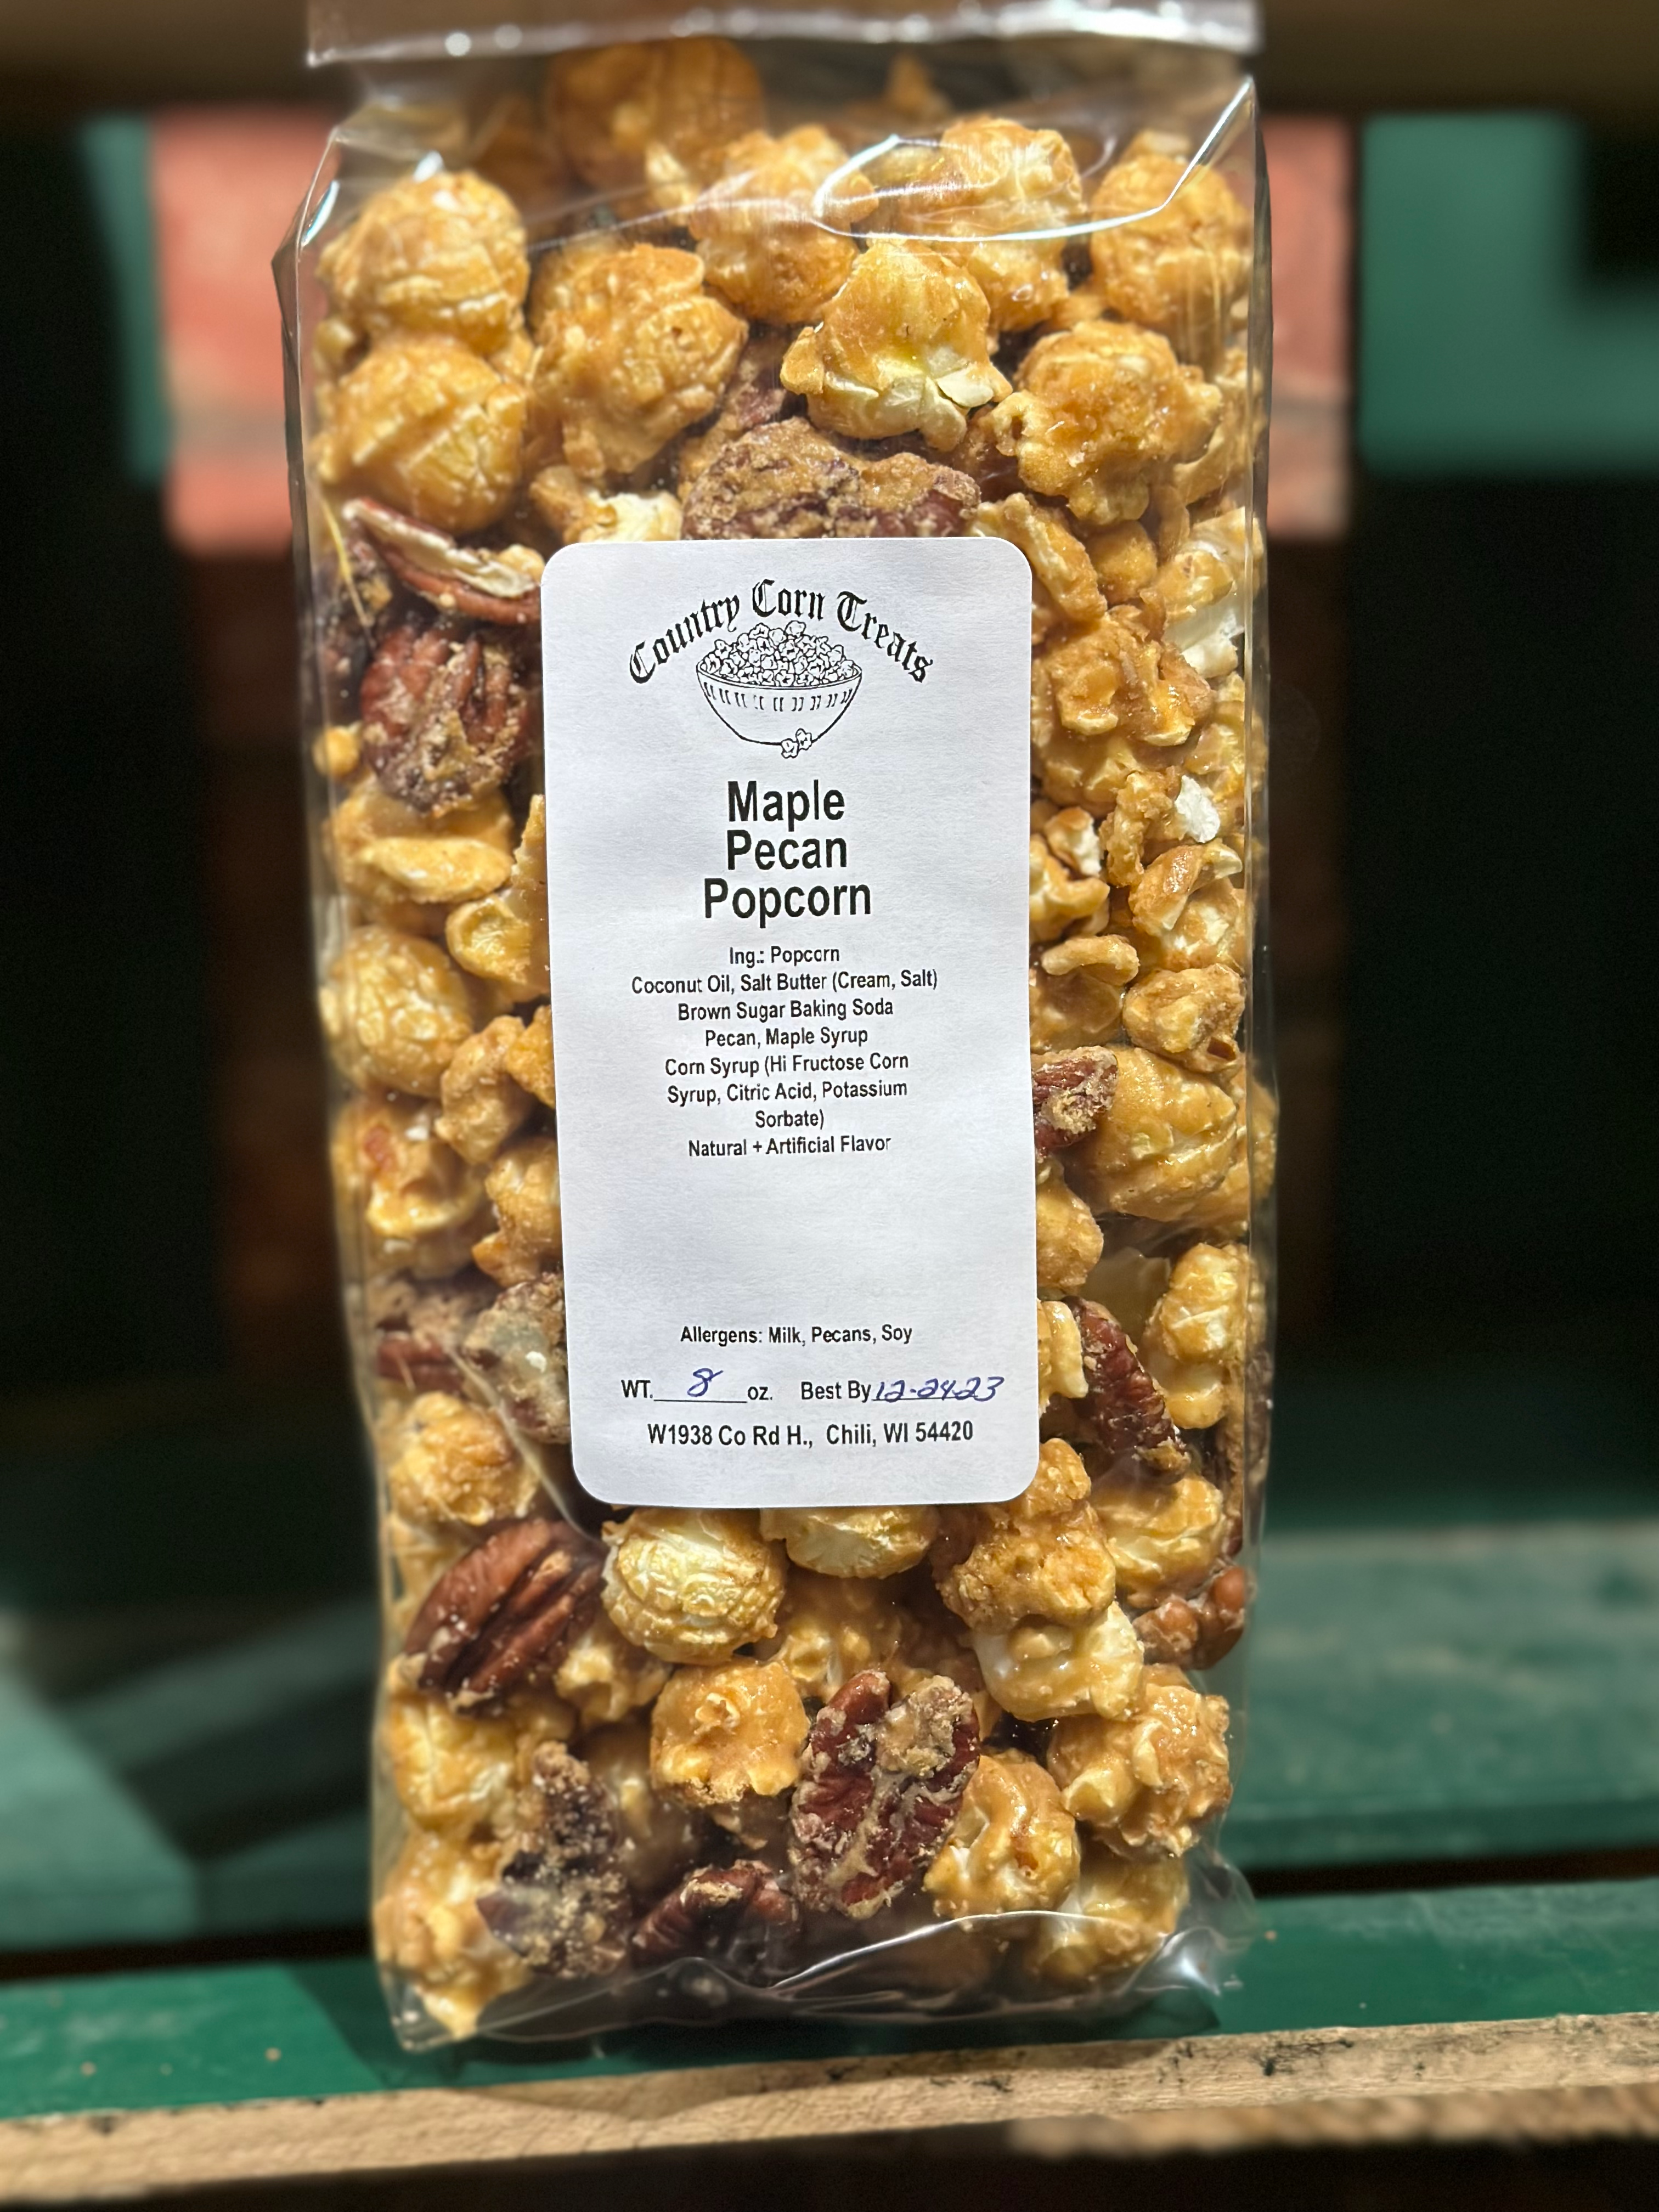 Deluxe Amish Kettle Corn